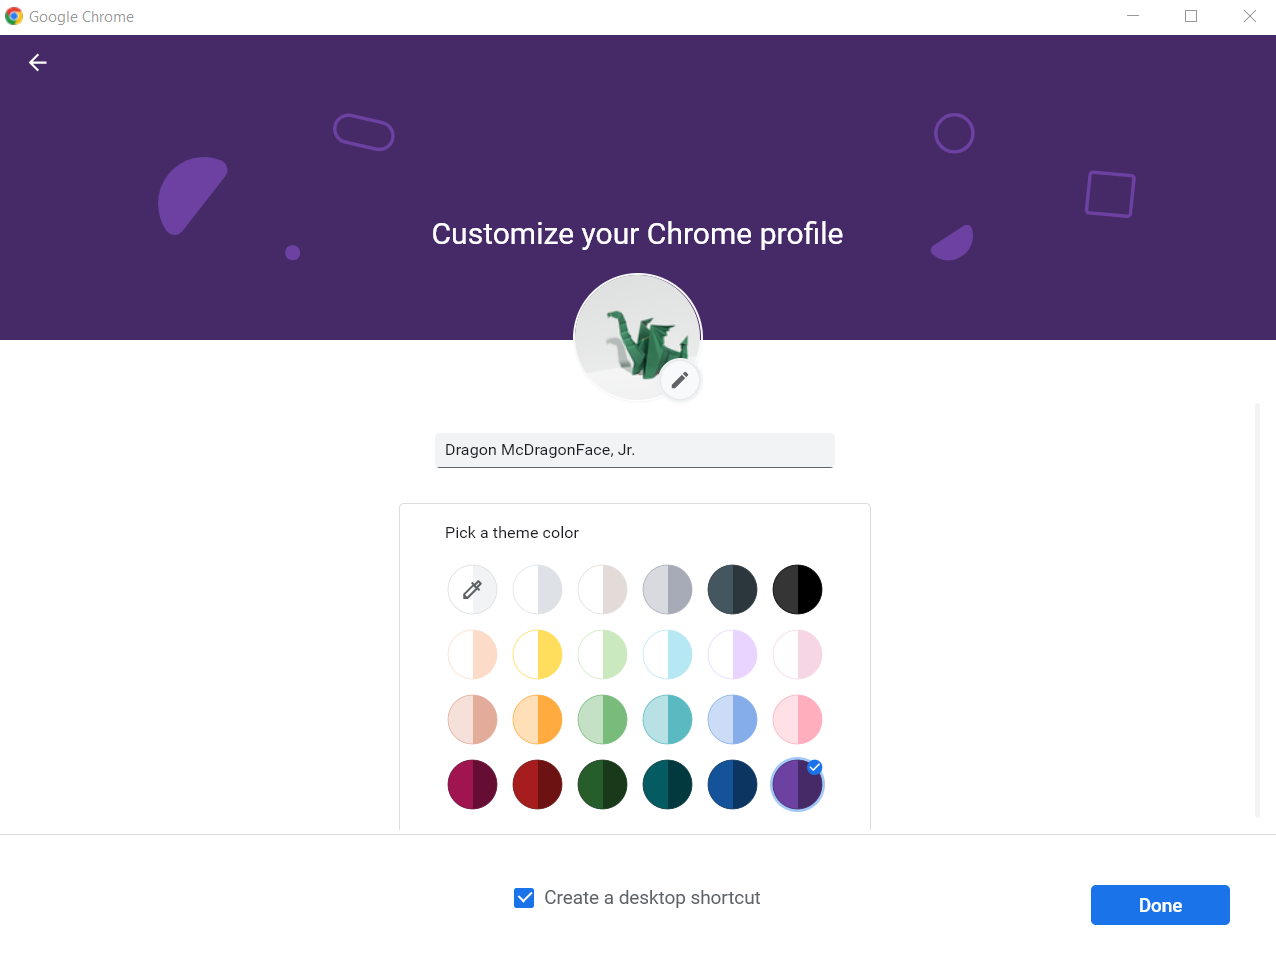 Screenshot of Google Chrome page titled 'Customize your Chrome Profile' with a dragon avatar and name 'Dragon McDragonface, Jr.'